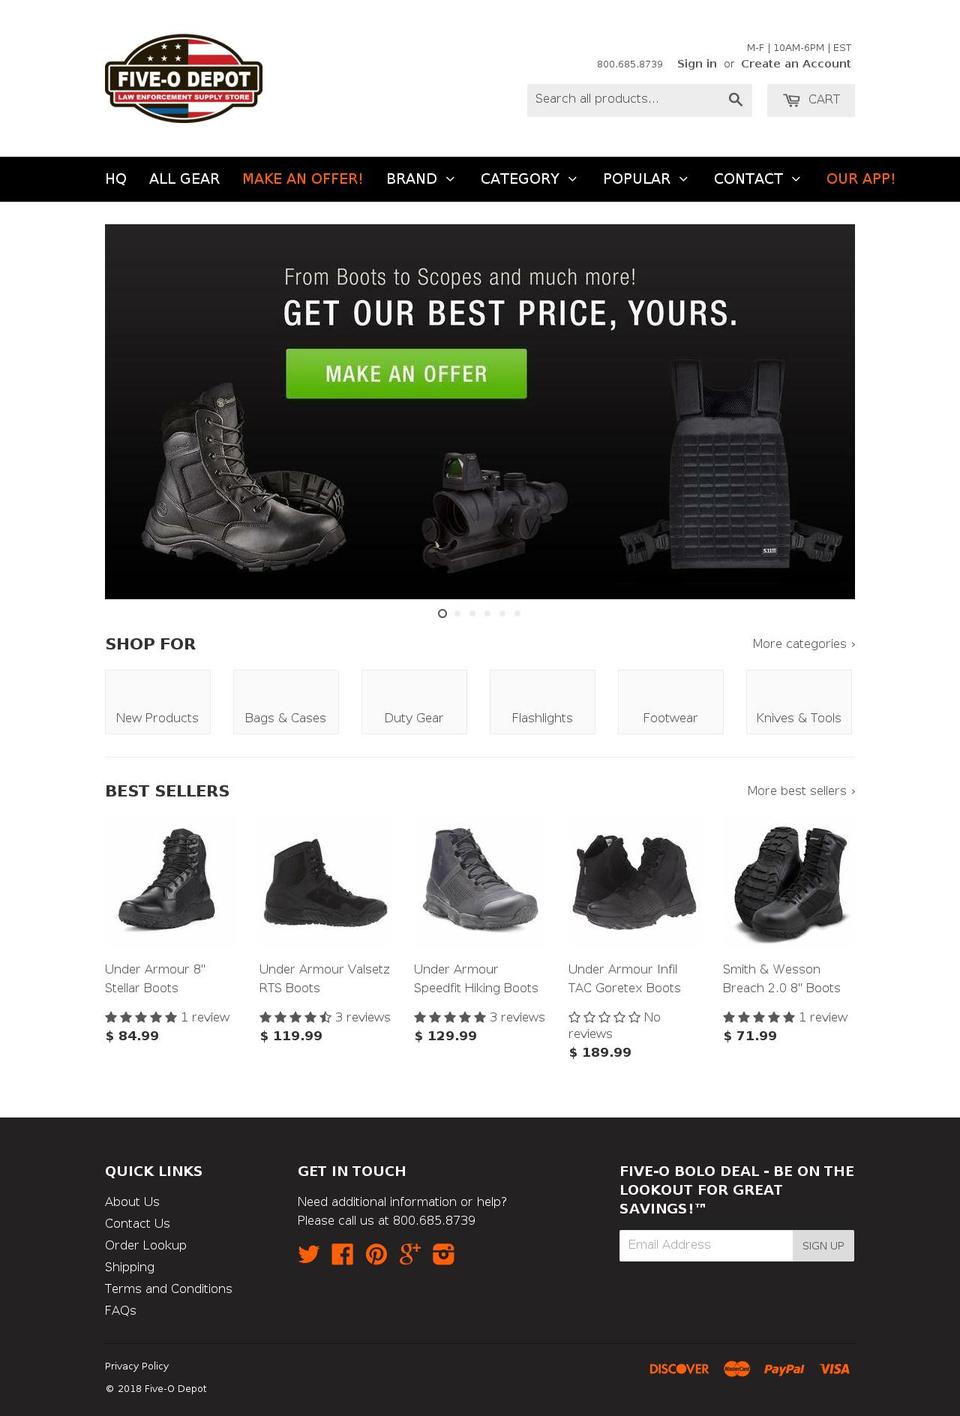 [DEV-AN]Five-O MAIN Theme - July 5 2018 Shopify theme site example police.bargains